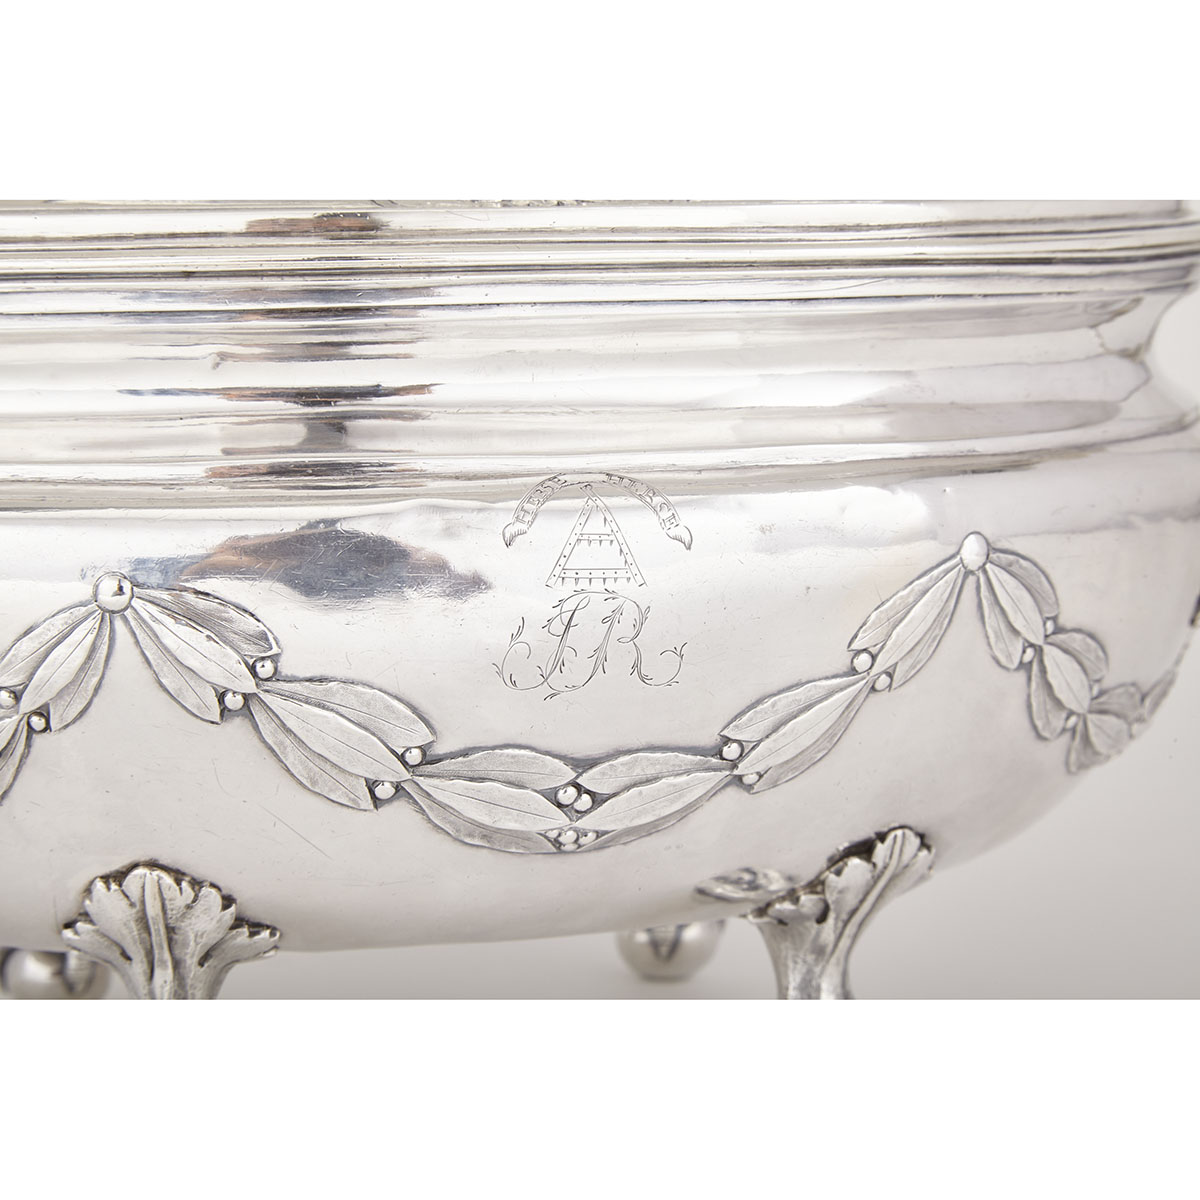 Canadian Silver Covered Soup Tureen, Laurent Amiot, Quebec City, c.1790